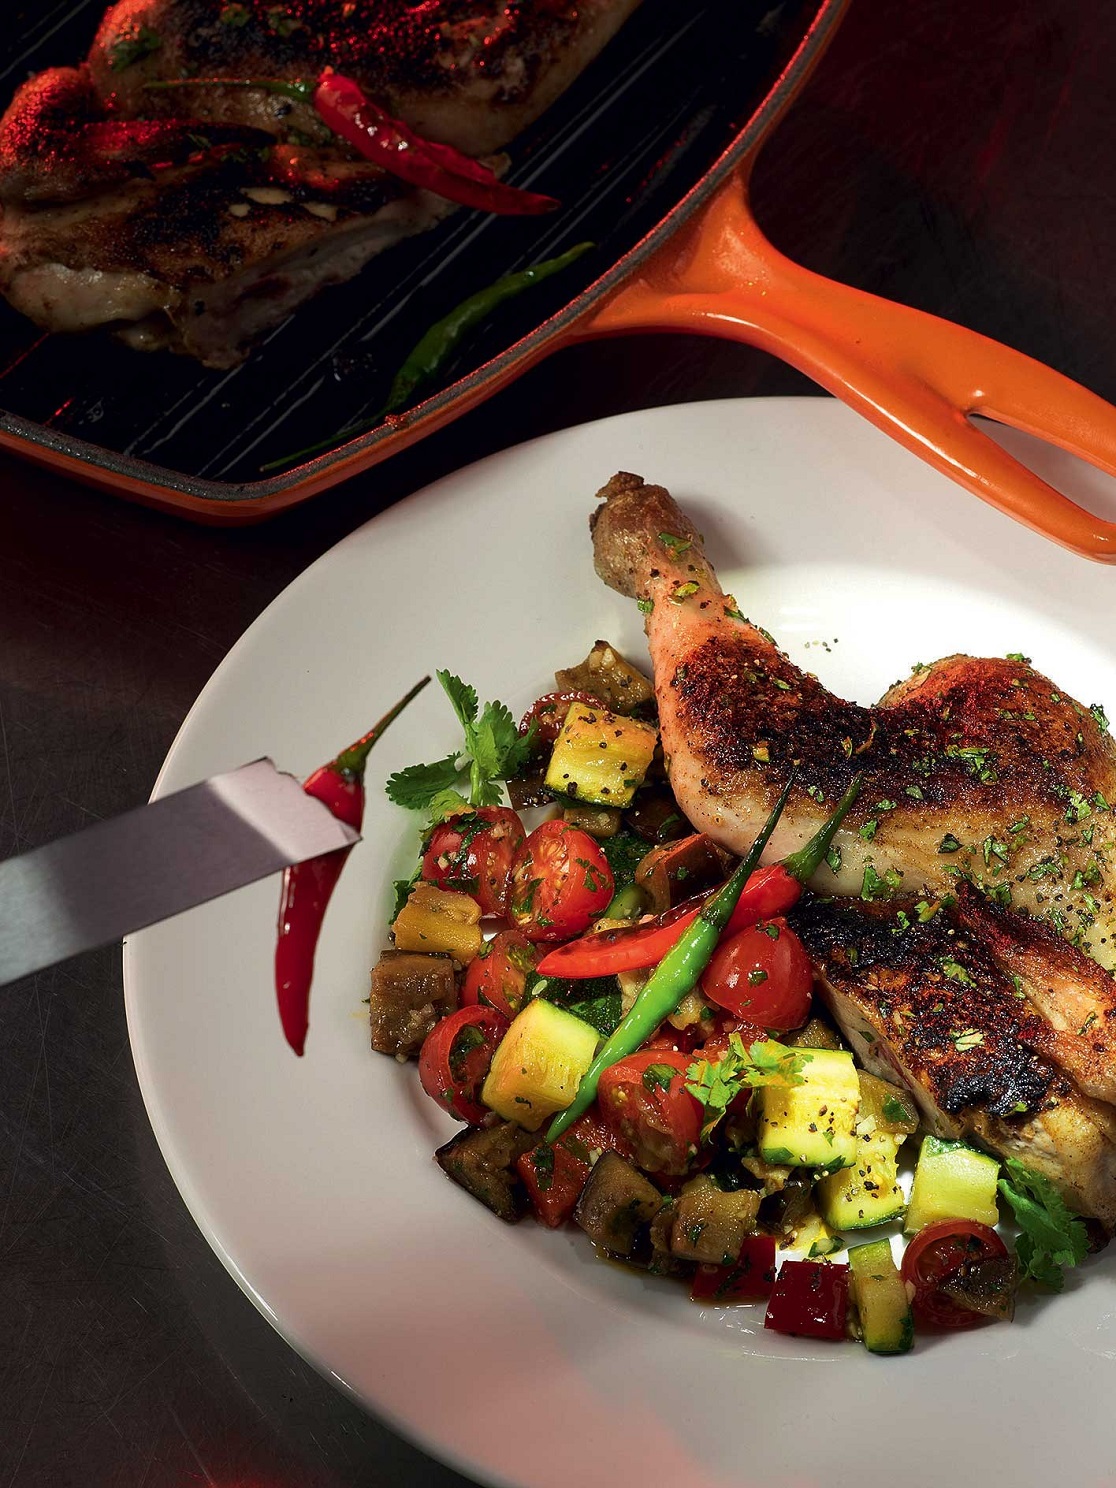 Chicken marinated in hot spices with vegetables